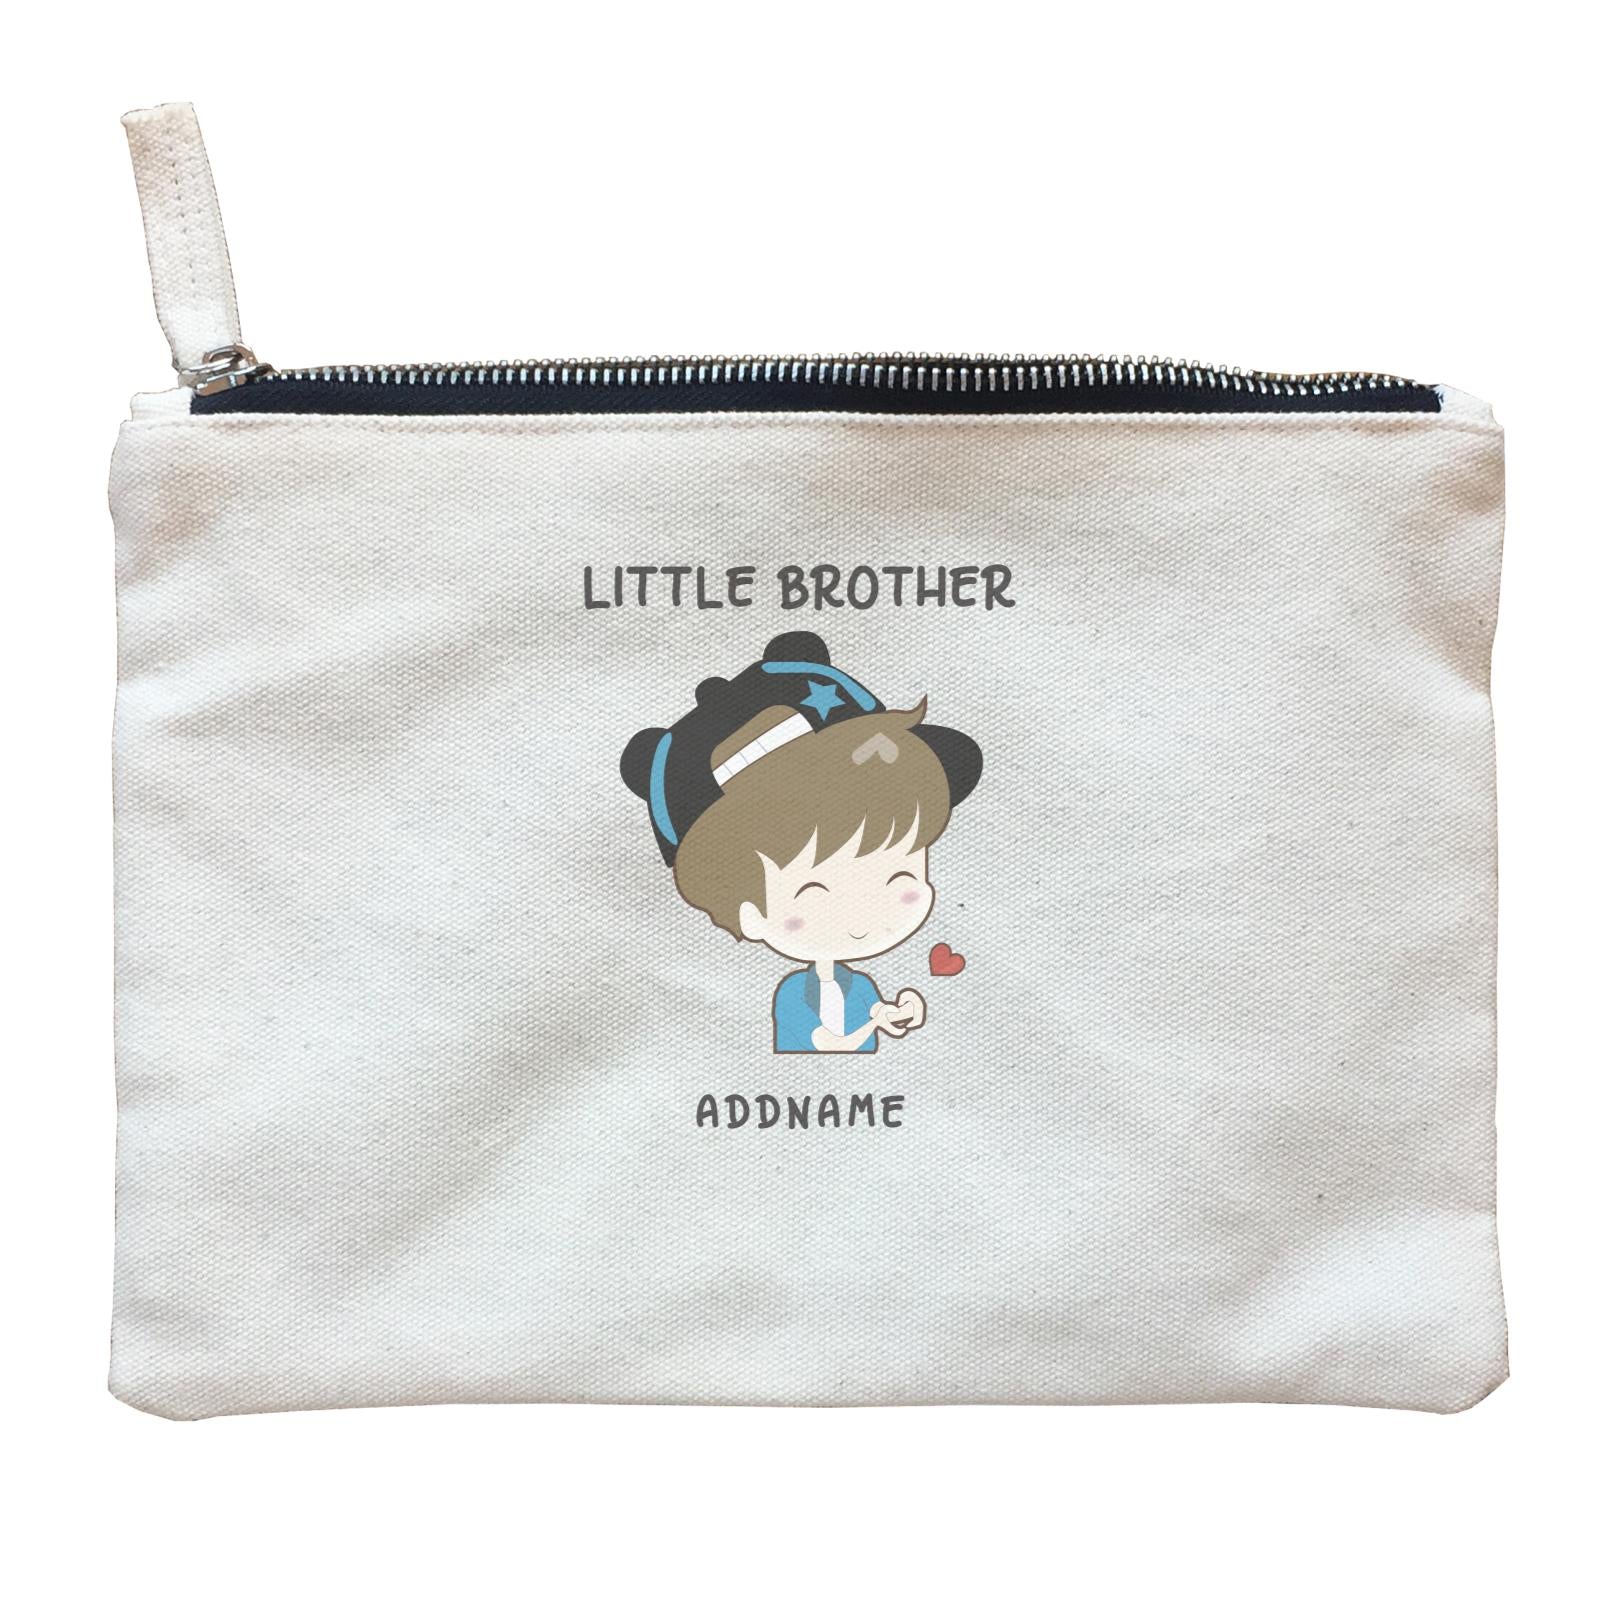 My Lovely Family Series Little Brother Addname Zipper Pouch